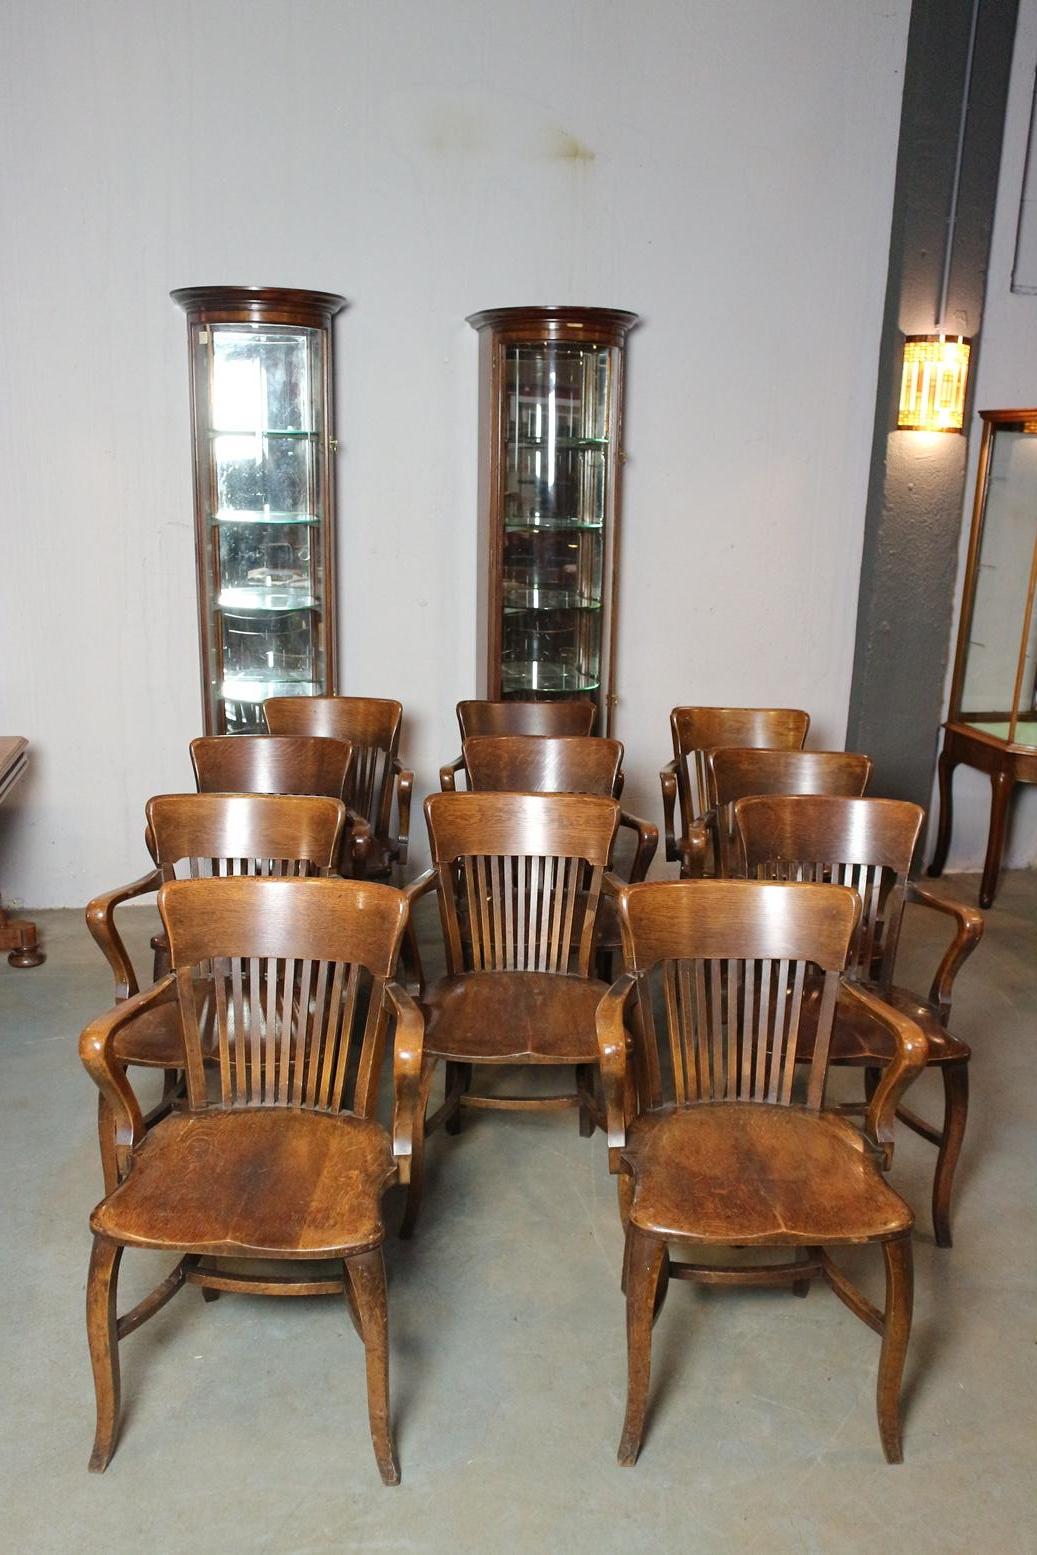 Nice set of 11 antique oak identical office chairs. Nice to use as dining room chairs or at a conference table. Good and comfortable chair. In good original condition. With signs of use.
Origin: England
Period: Approx. 1920.